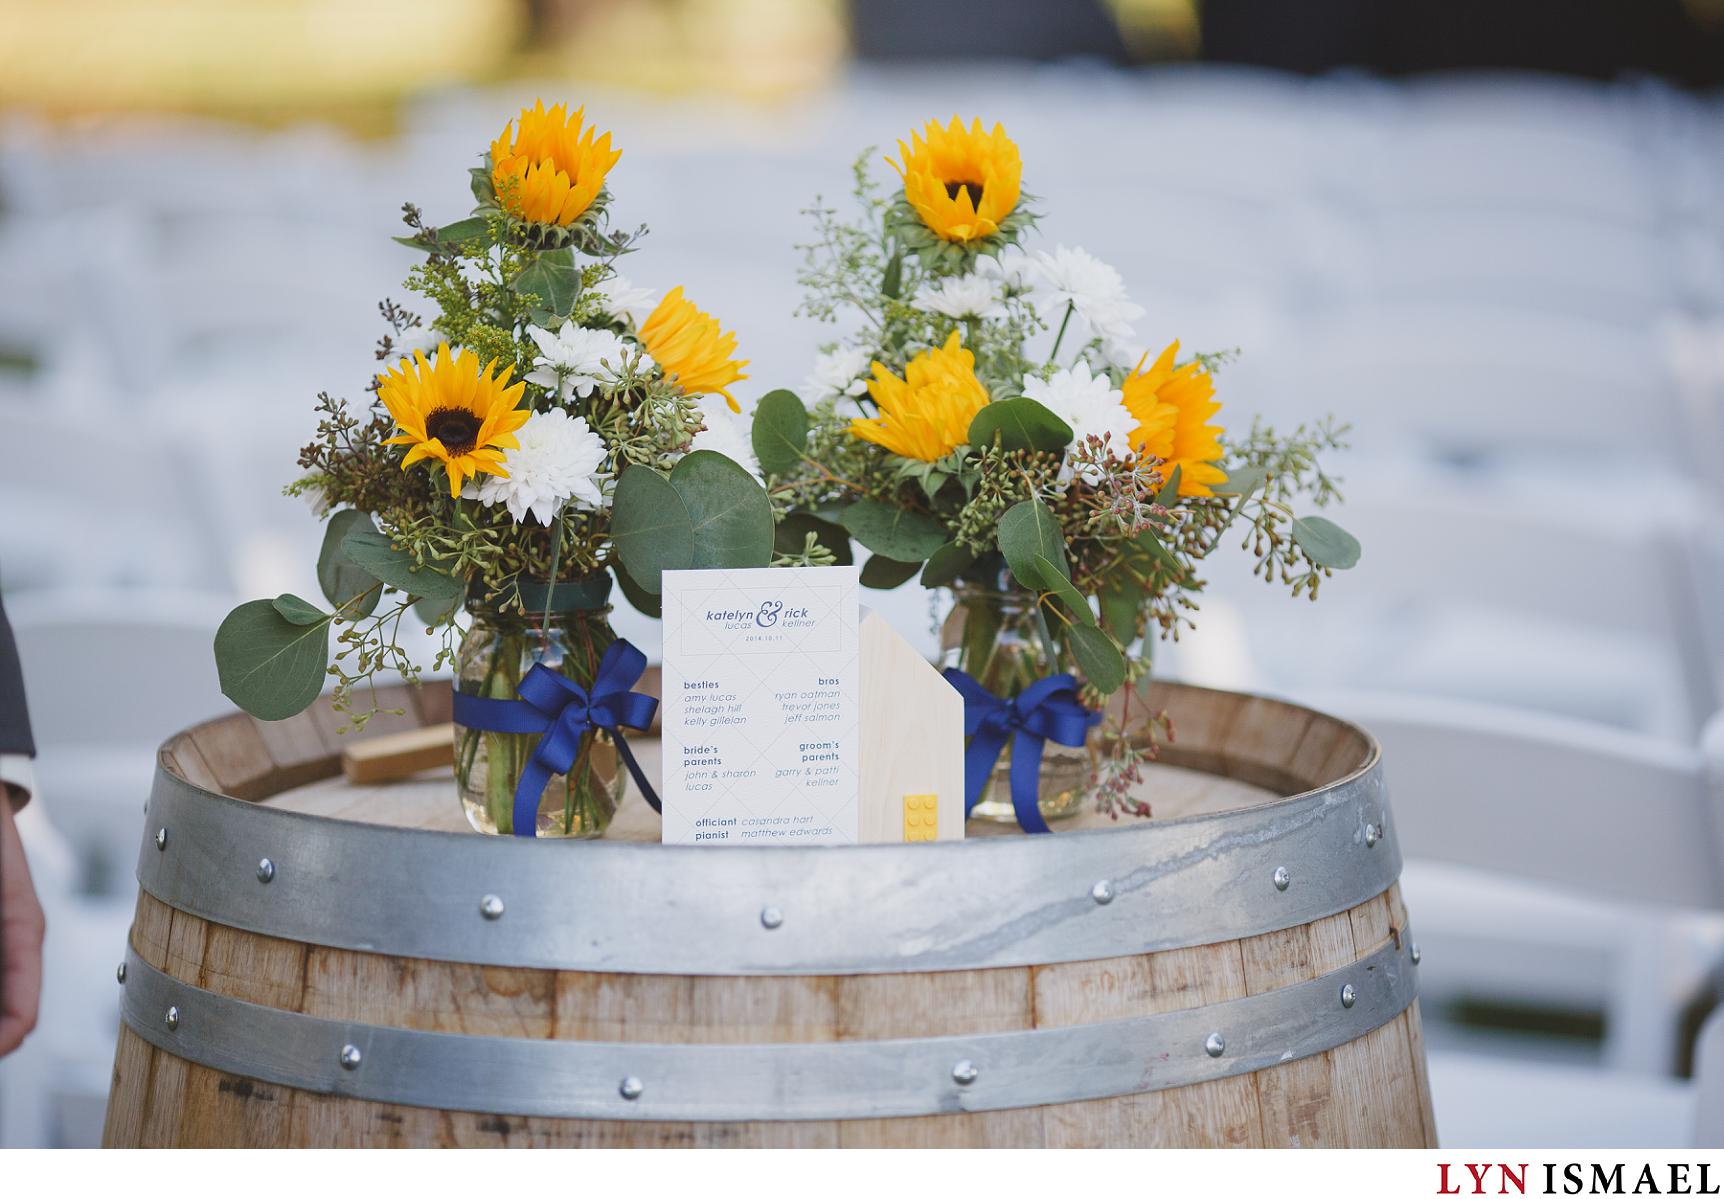 Yello sunflowers in mason jars decorated with royal blue ribbons.